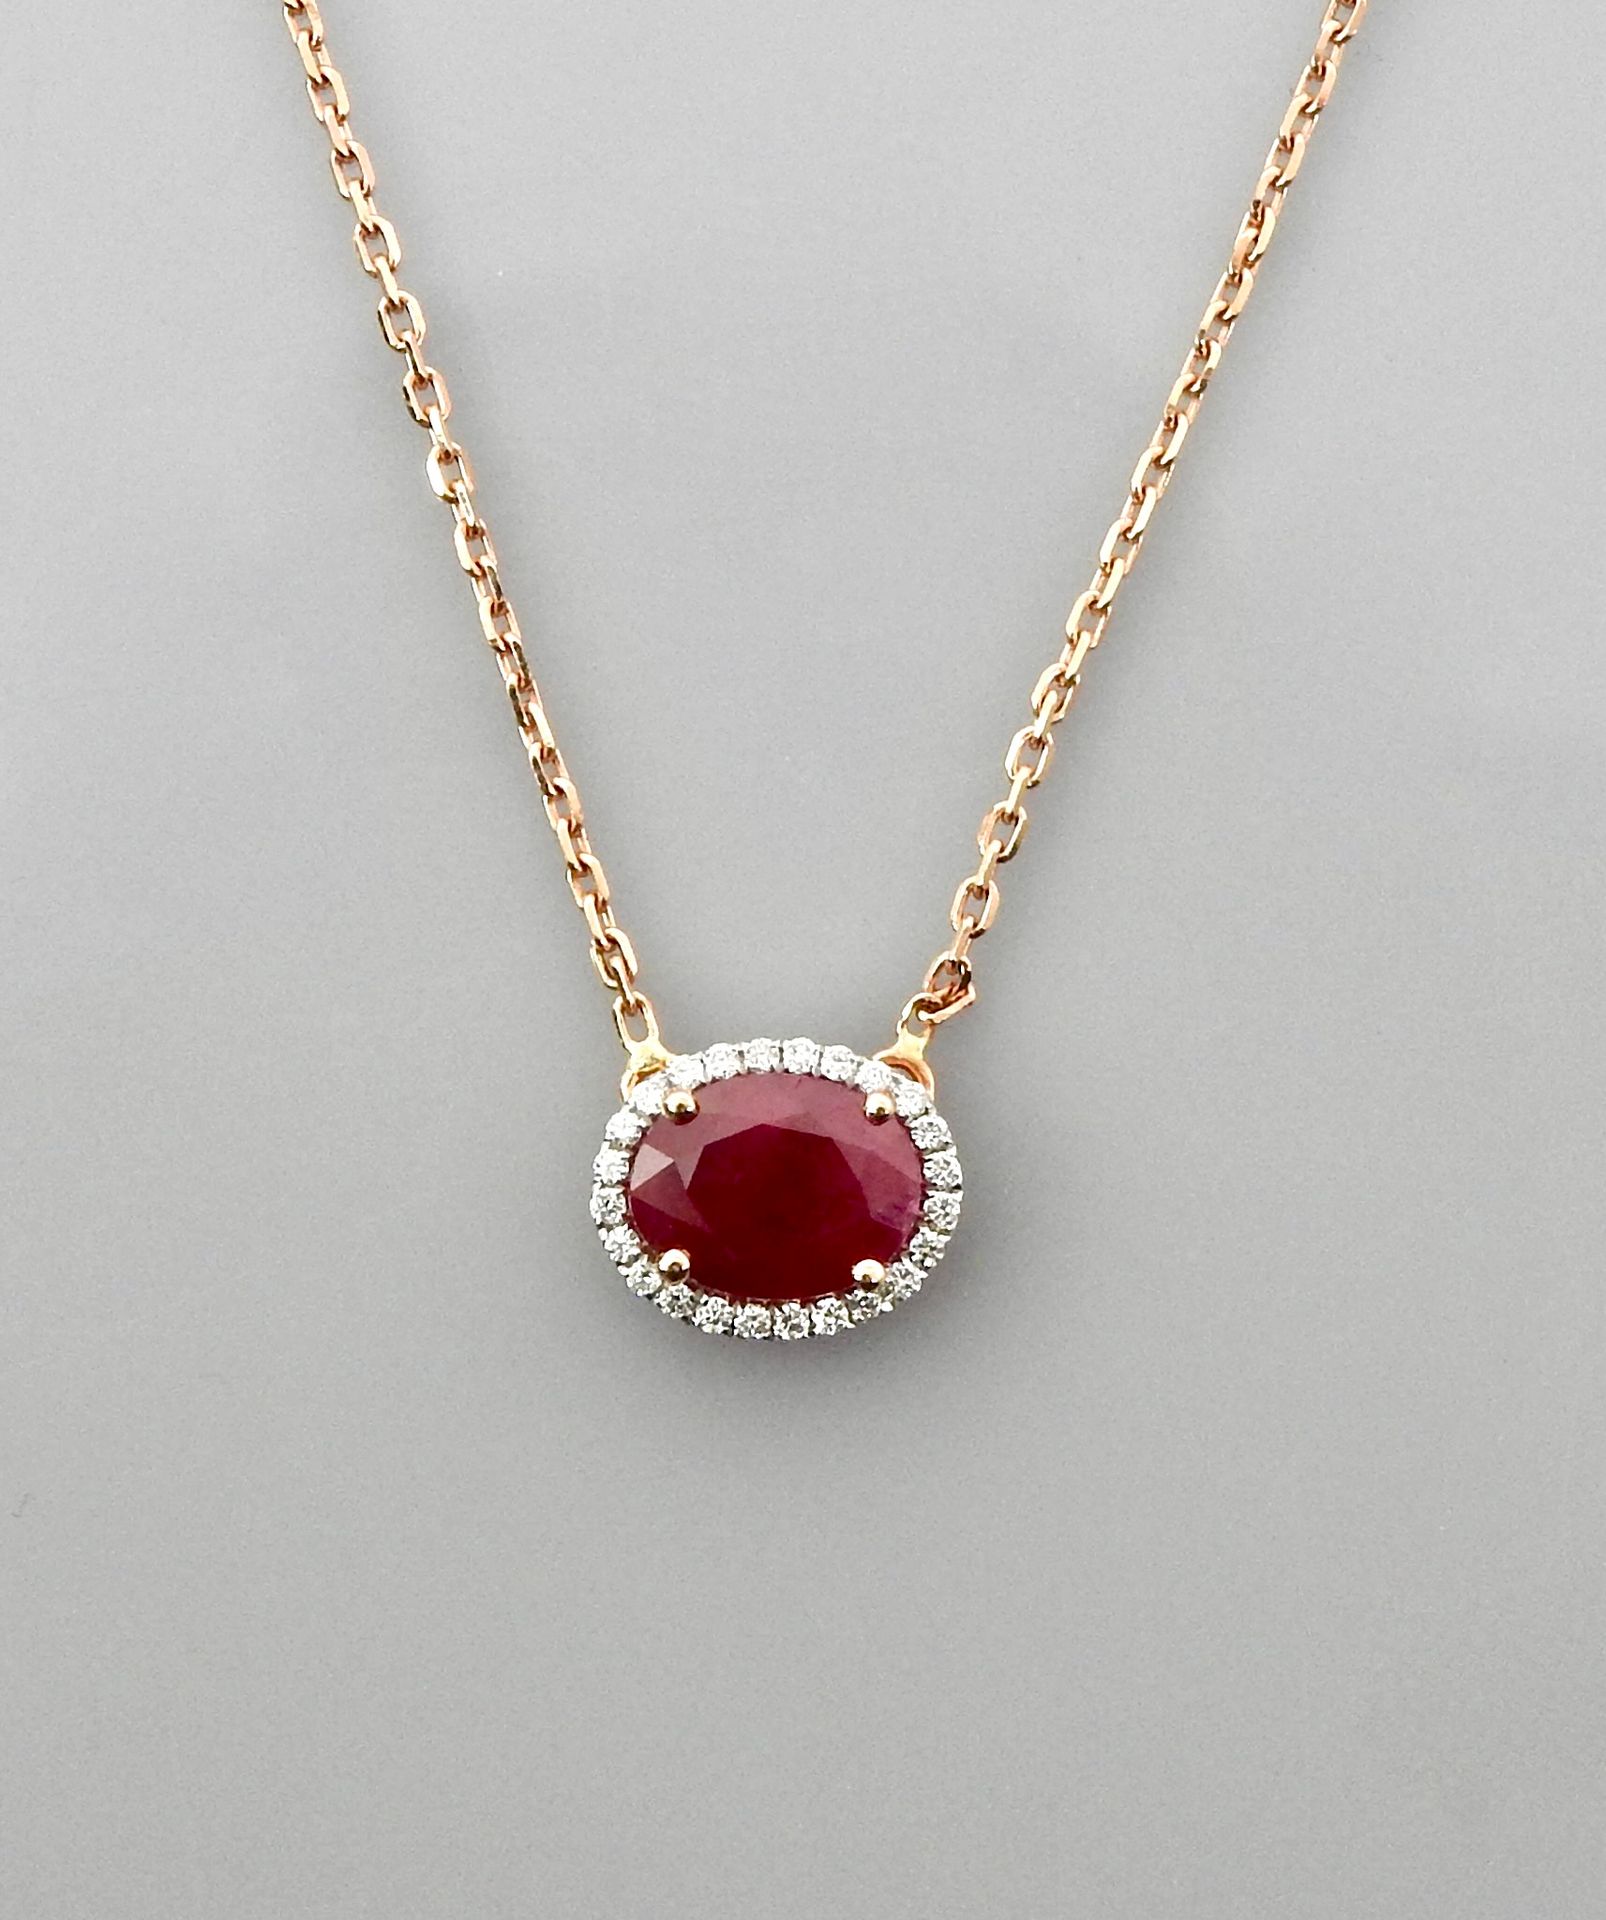 Null Chain and pendant in white gold, 750 MM, centered on an oval ruby weighing &hellip;